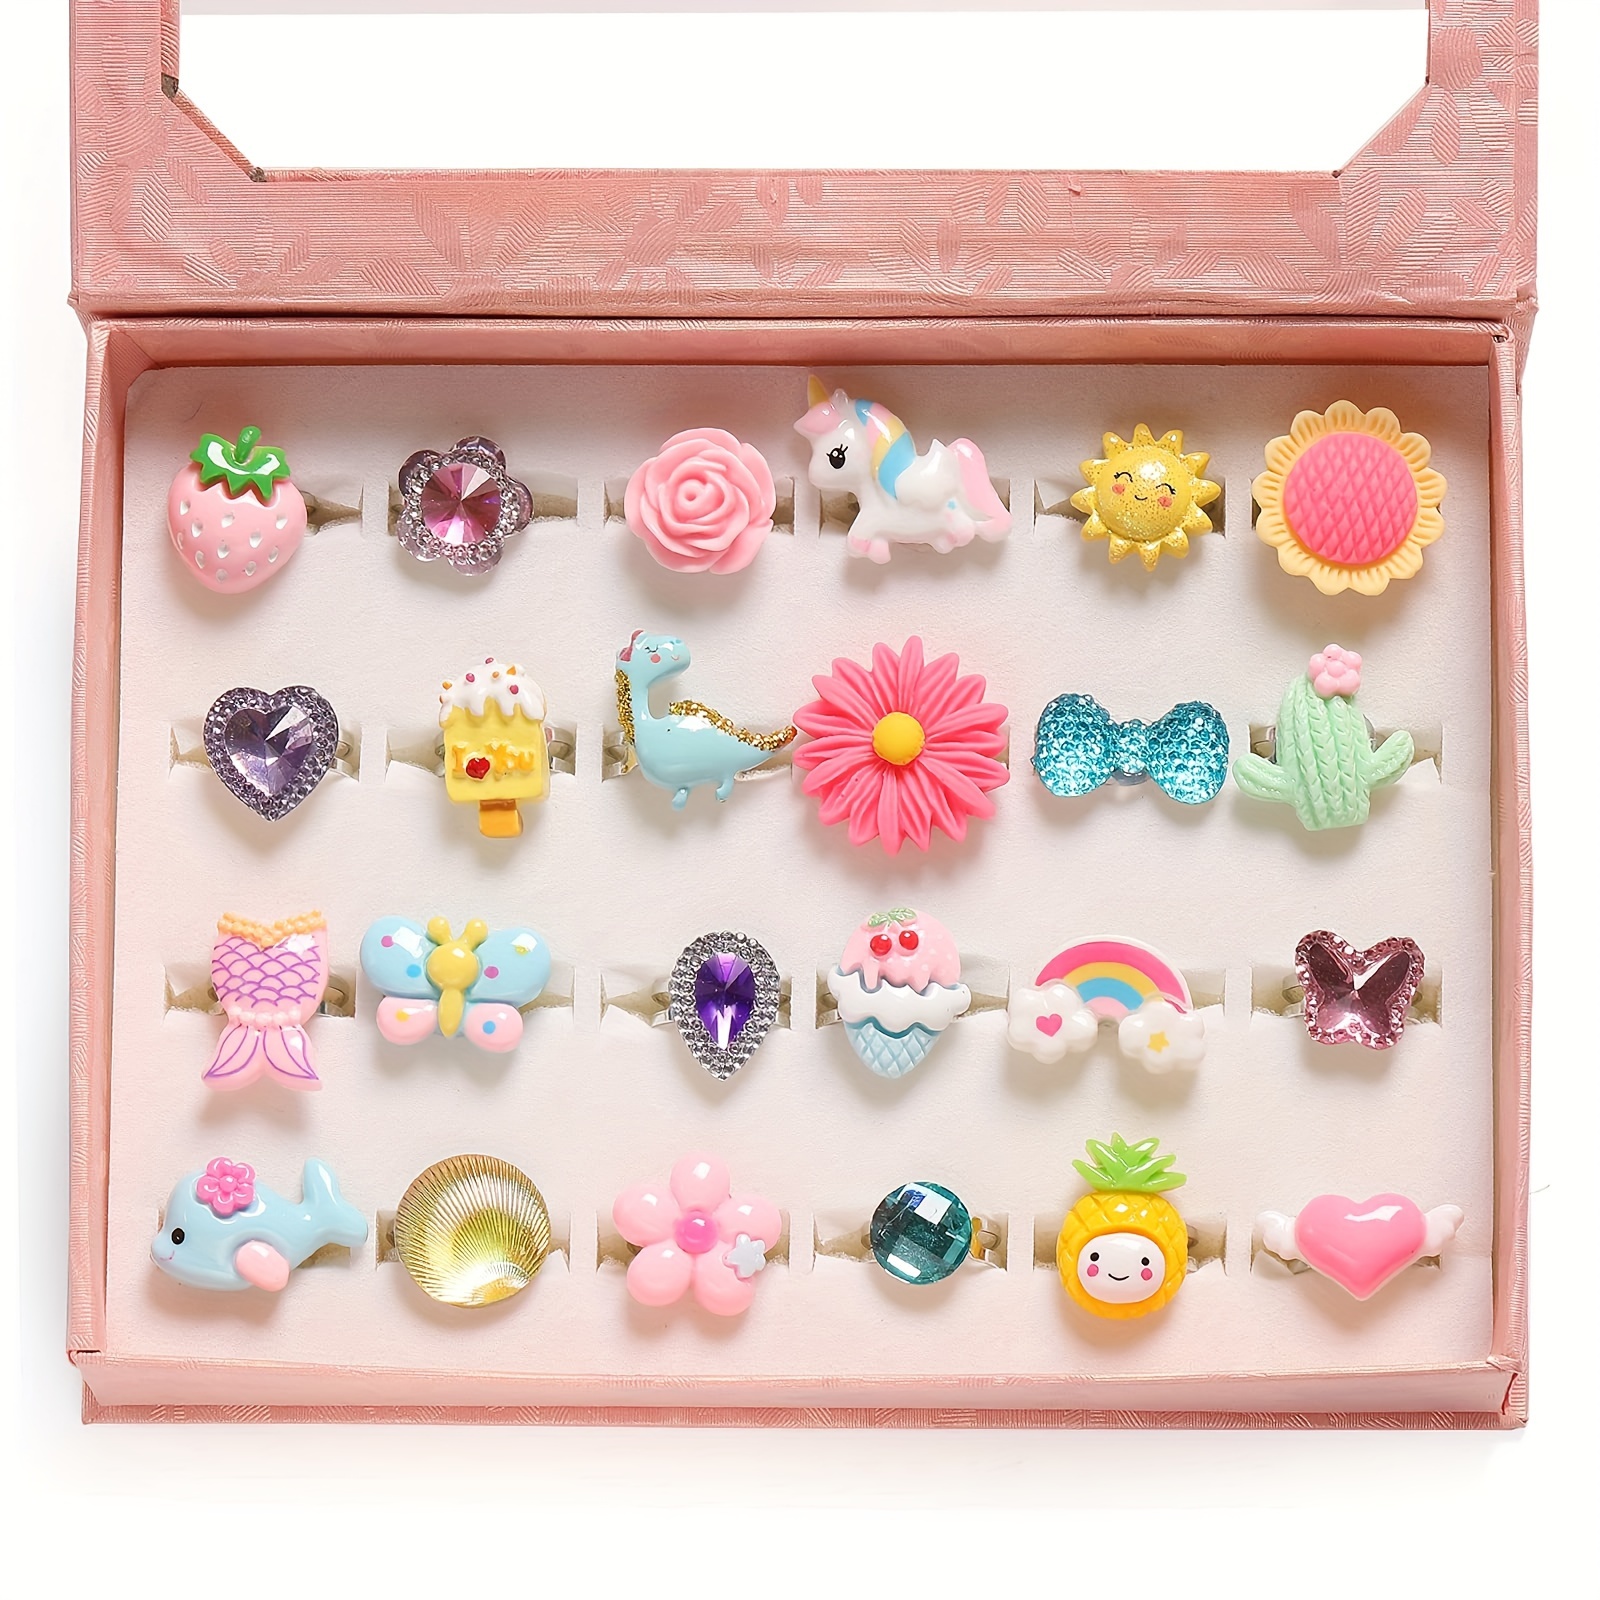 Nicmore Adjustable Rings Gift for Girl: Jewelry Rings for 3 4 5 6 7 8 9 10  11 12 Years Old Girl Gifts | 24PCS in Box Cute Ring Toys for Toddlers